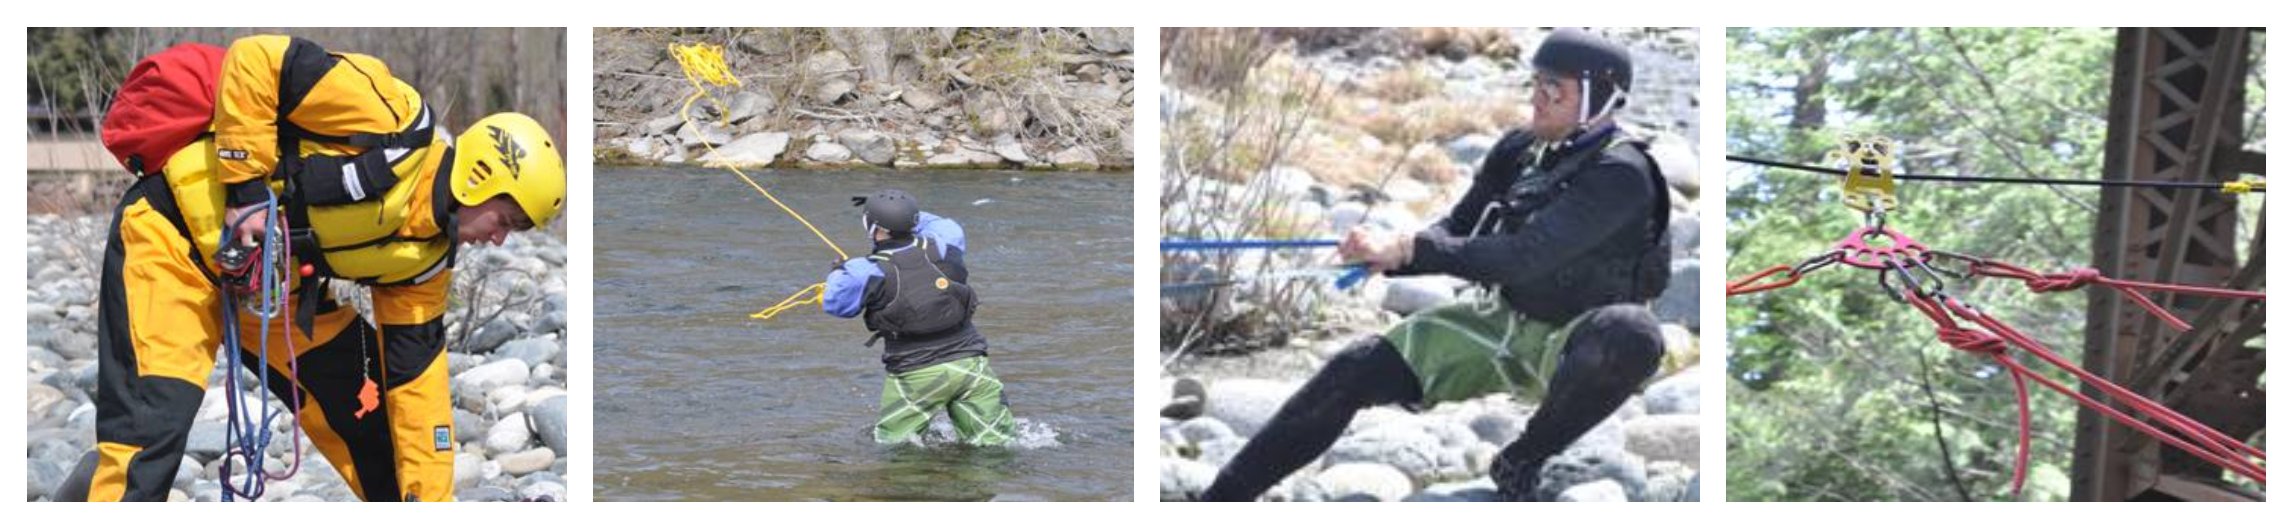 whitewater river rescue class in washington